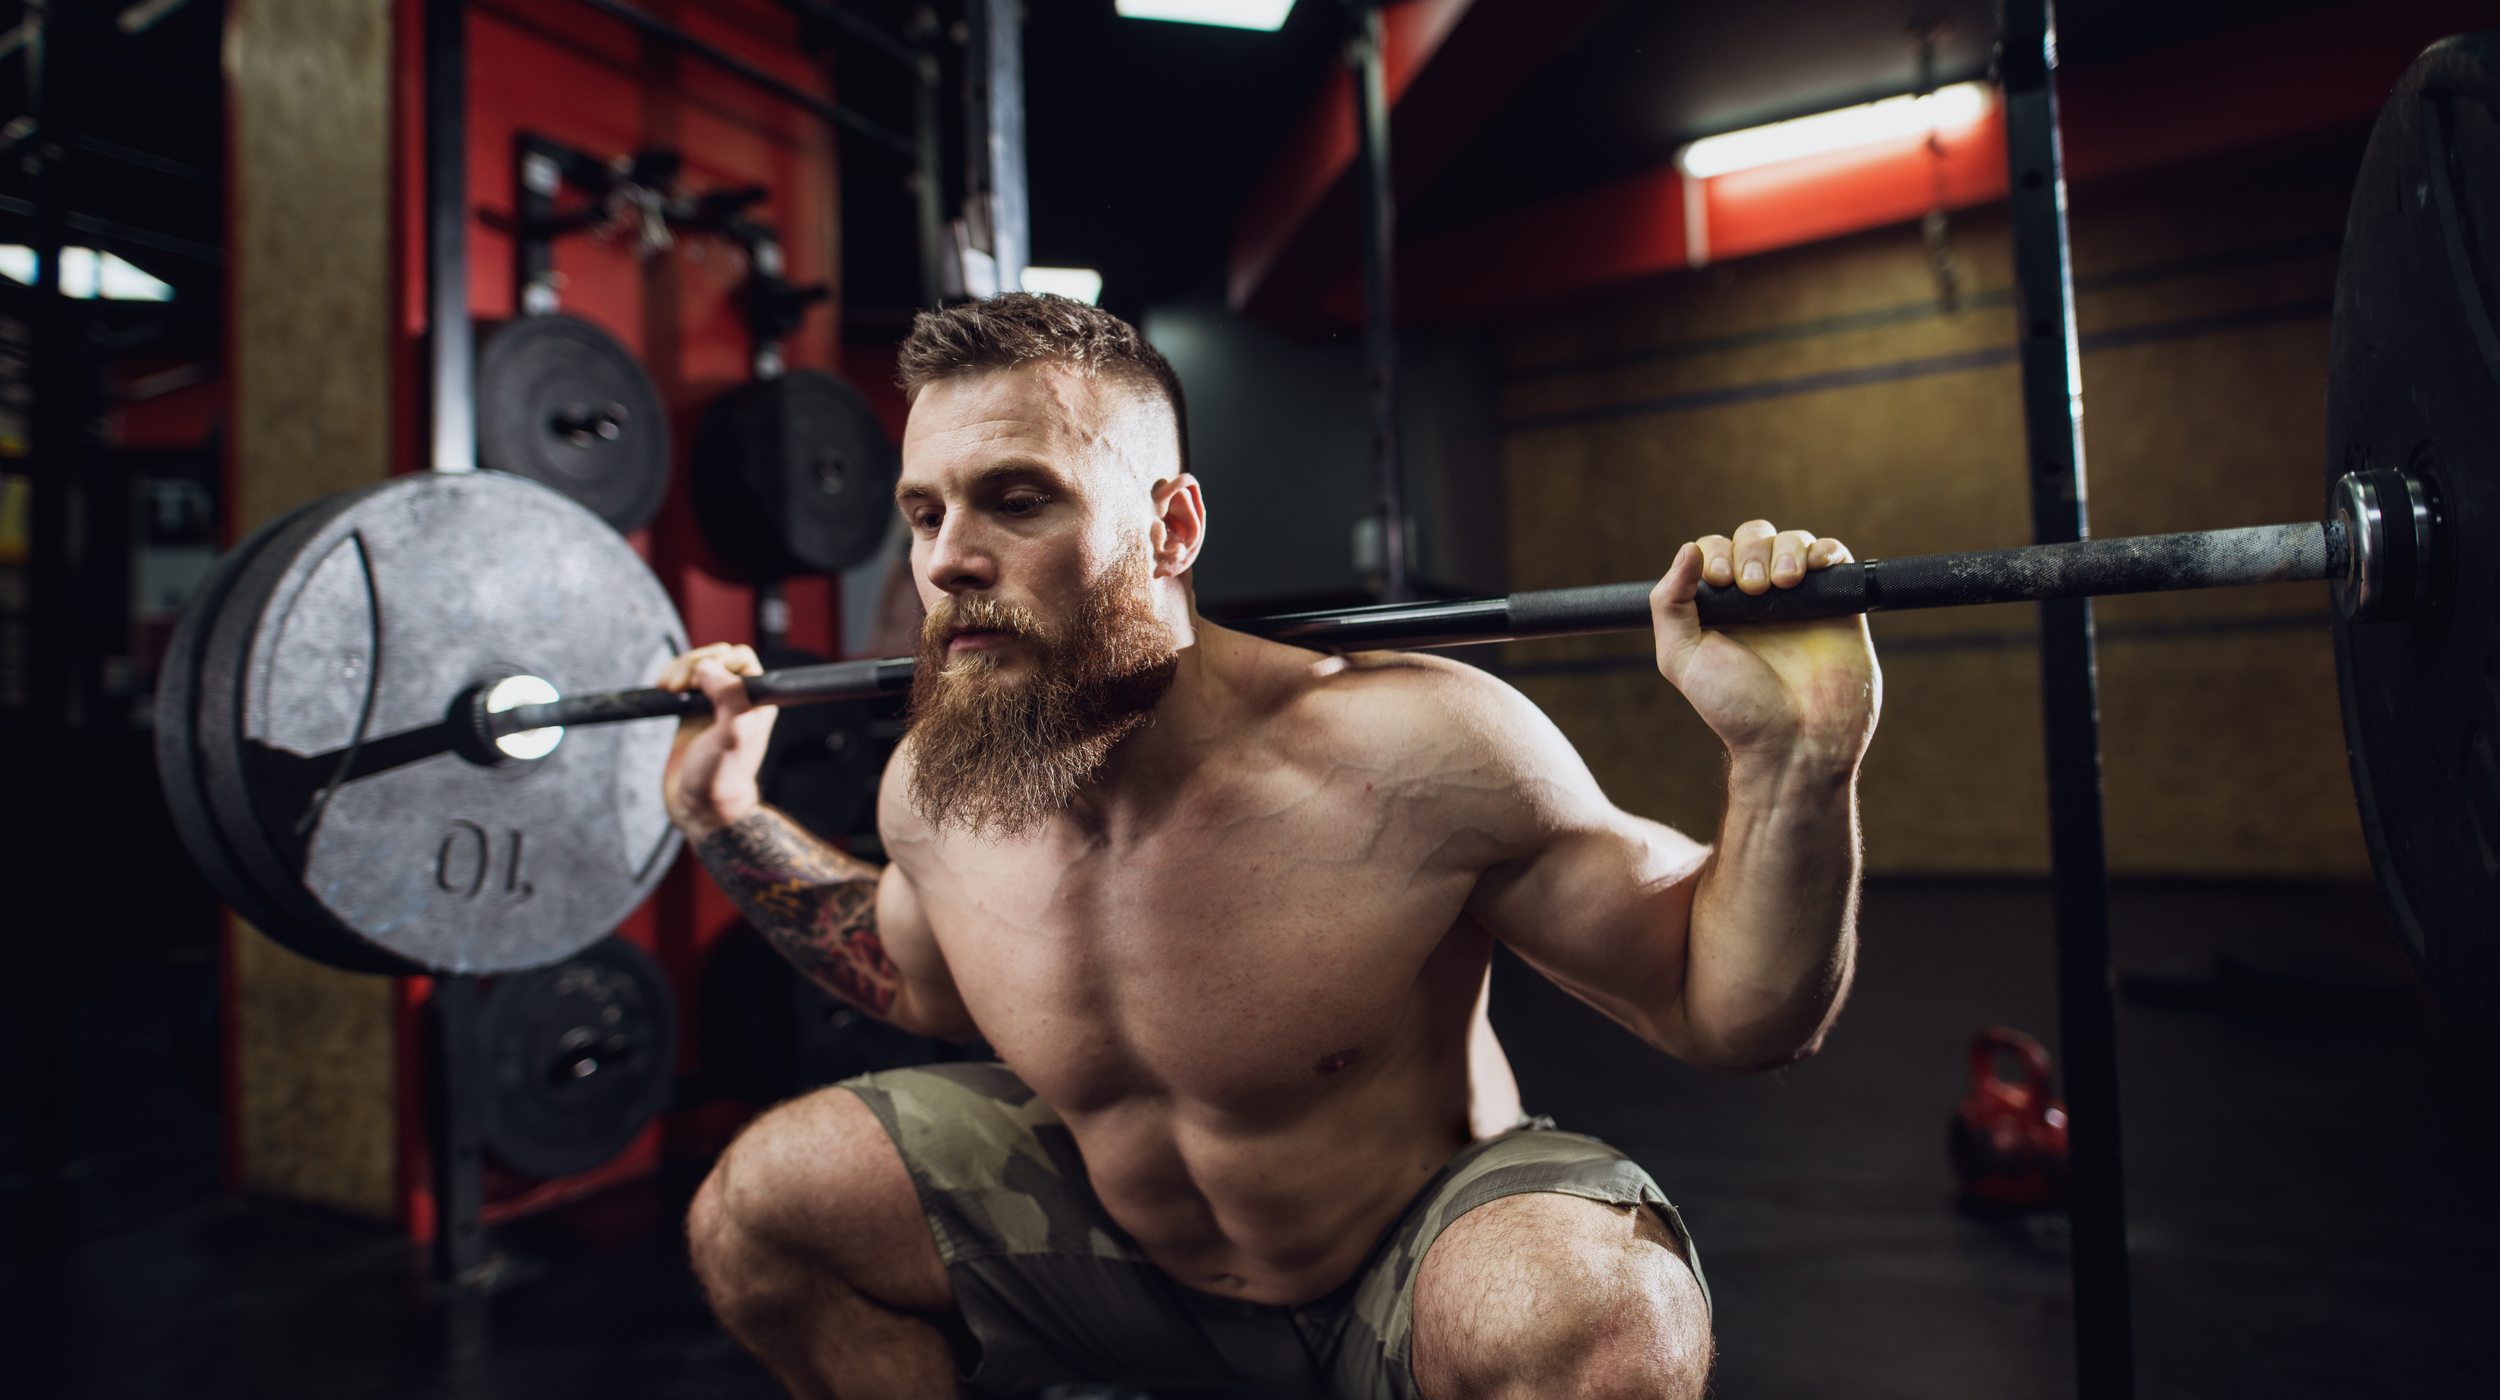 Top 3 Resistance Training Exercises You Should be Doing